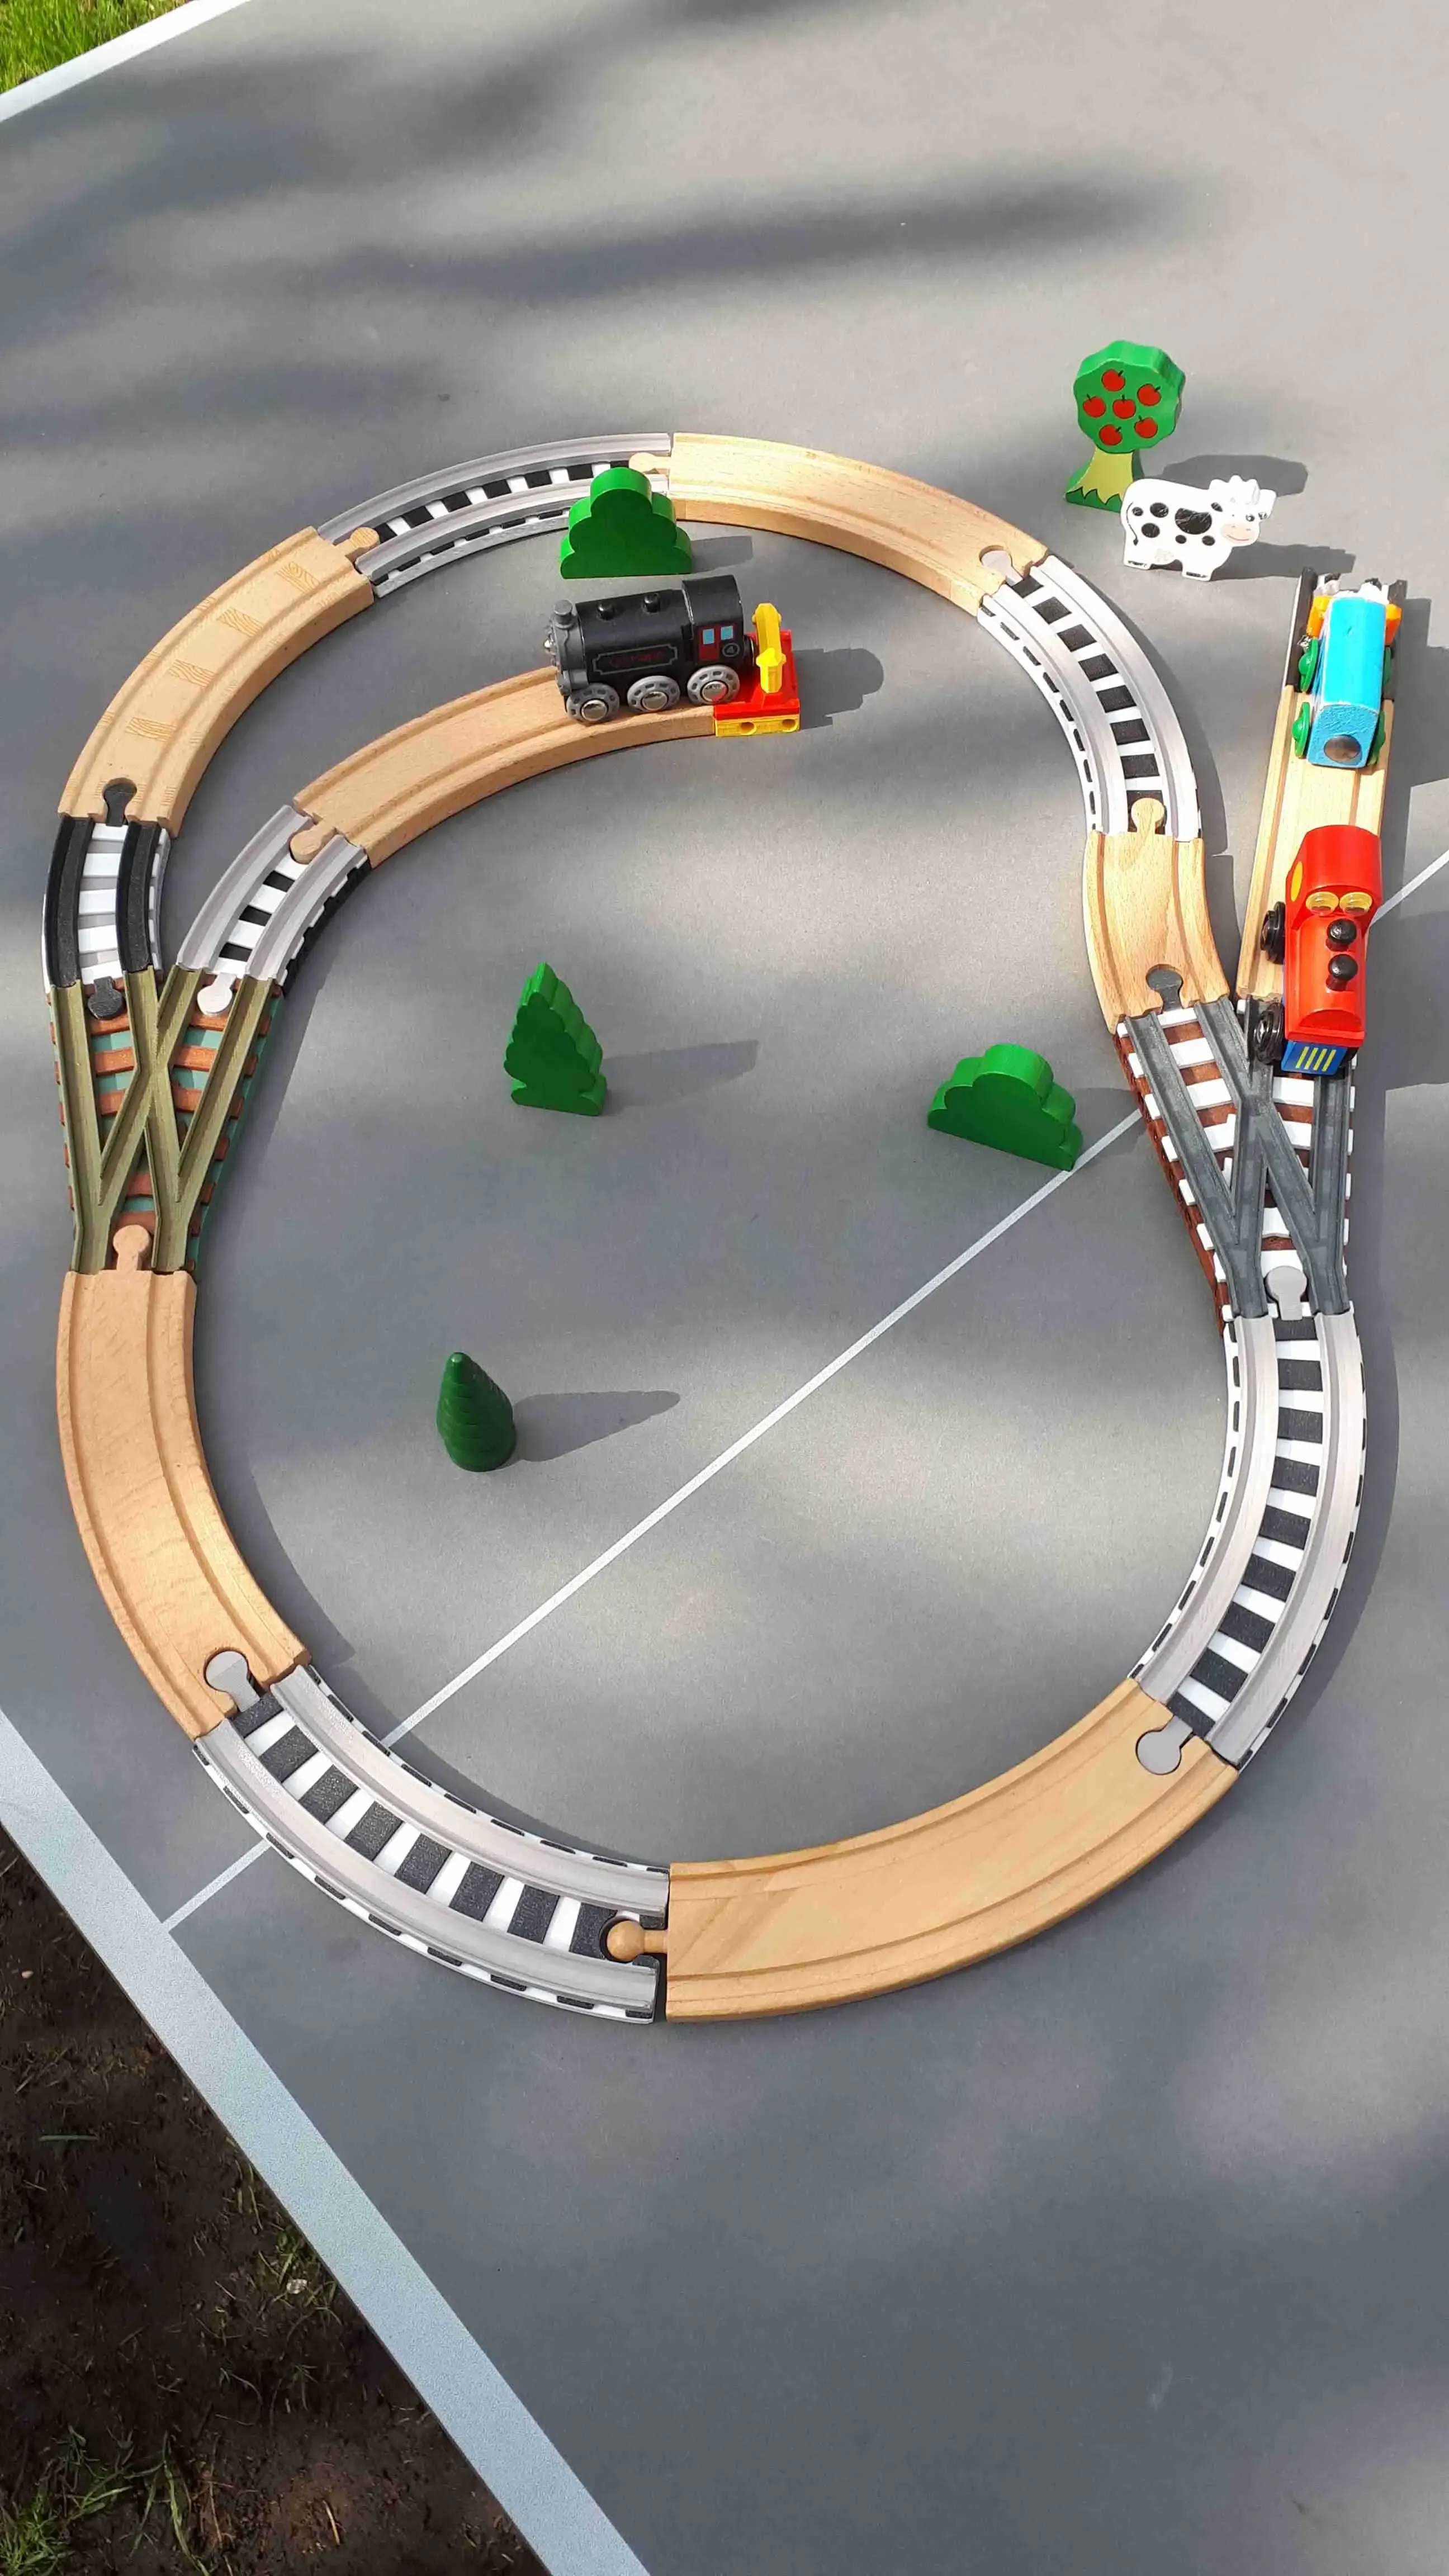 Wooden railway curves and forks with sleepers